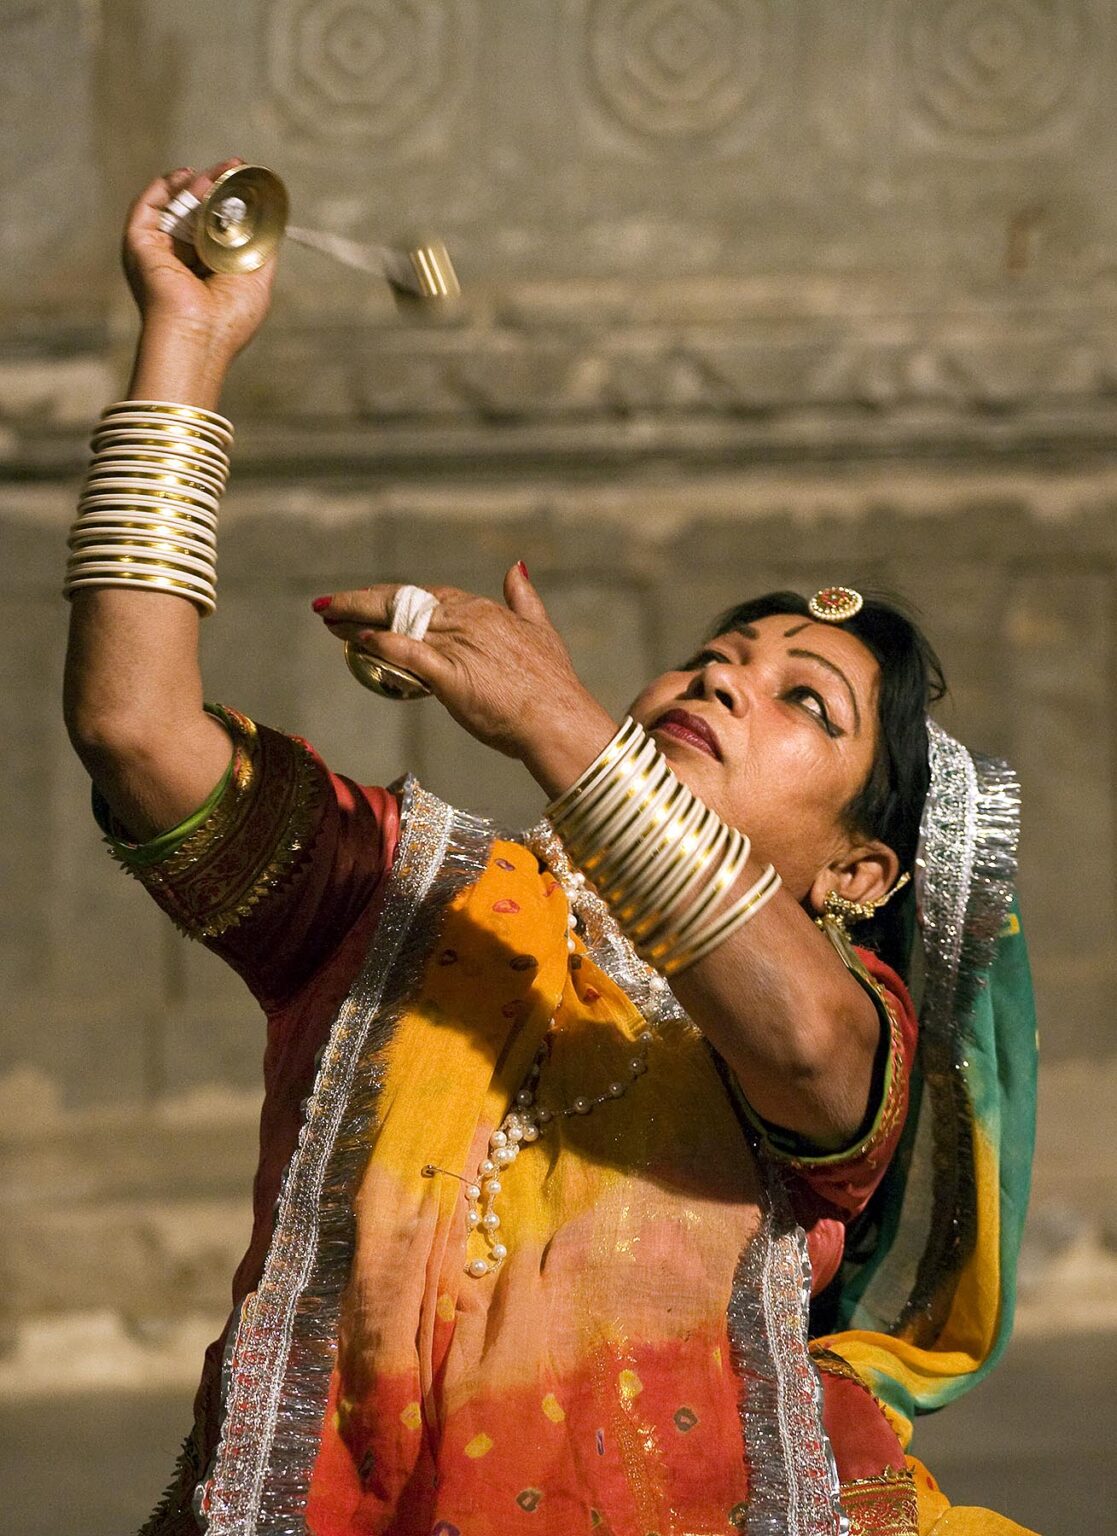 A Rajasthani woman performs a traditional DANCE using metal CYMBALS at the BAGORE KI HAVELI in UDAIPUR - RAJASTHAN, INDIA